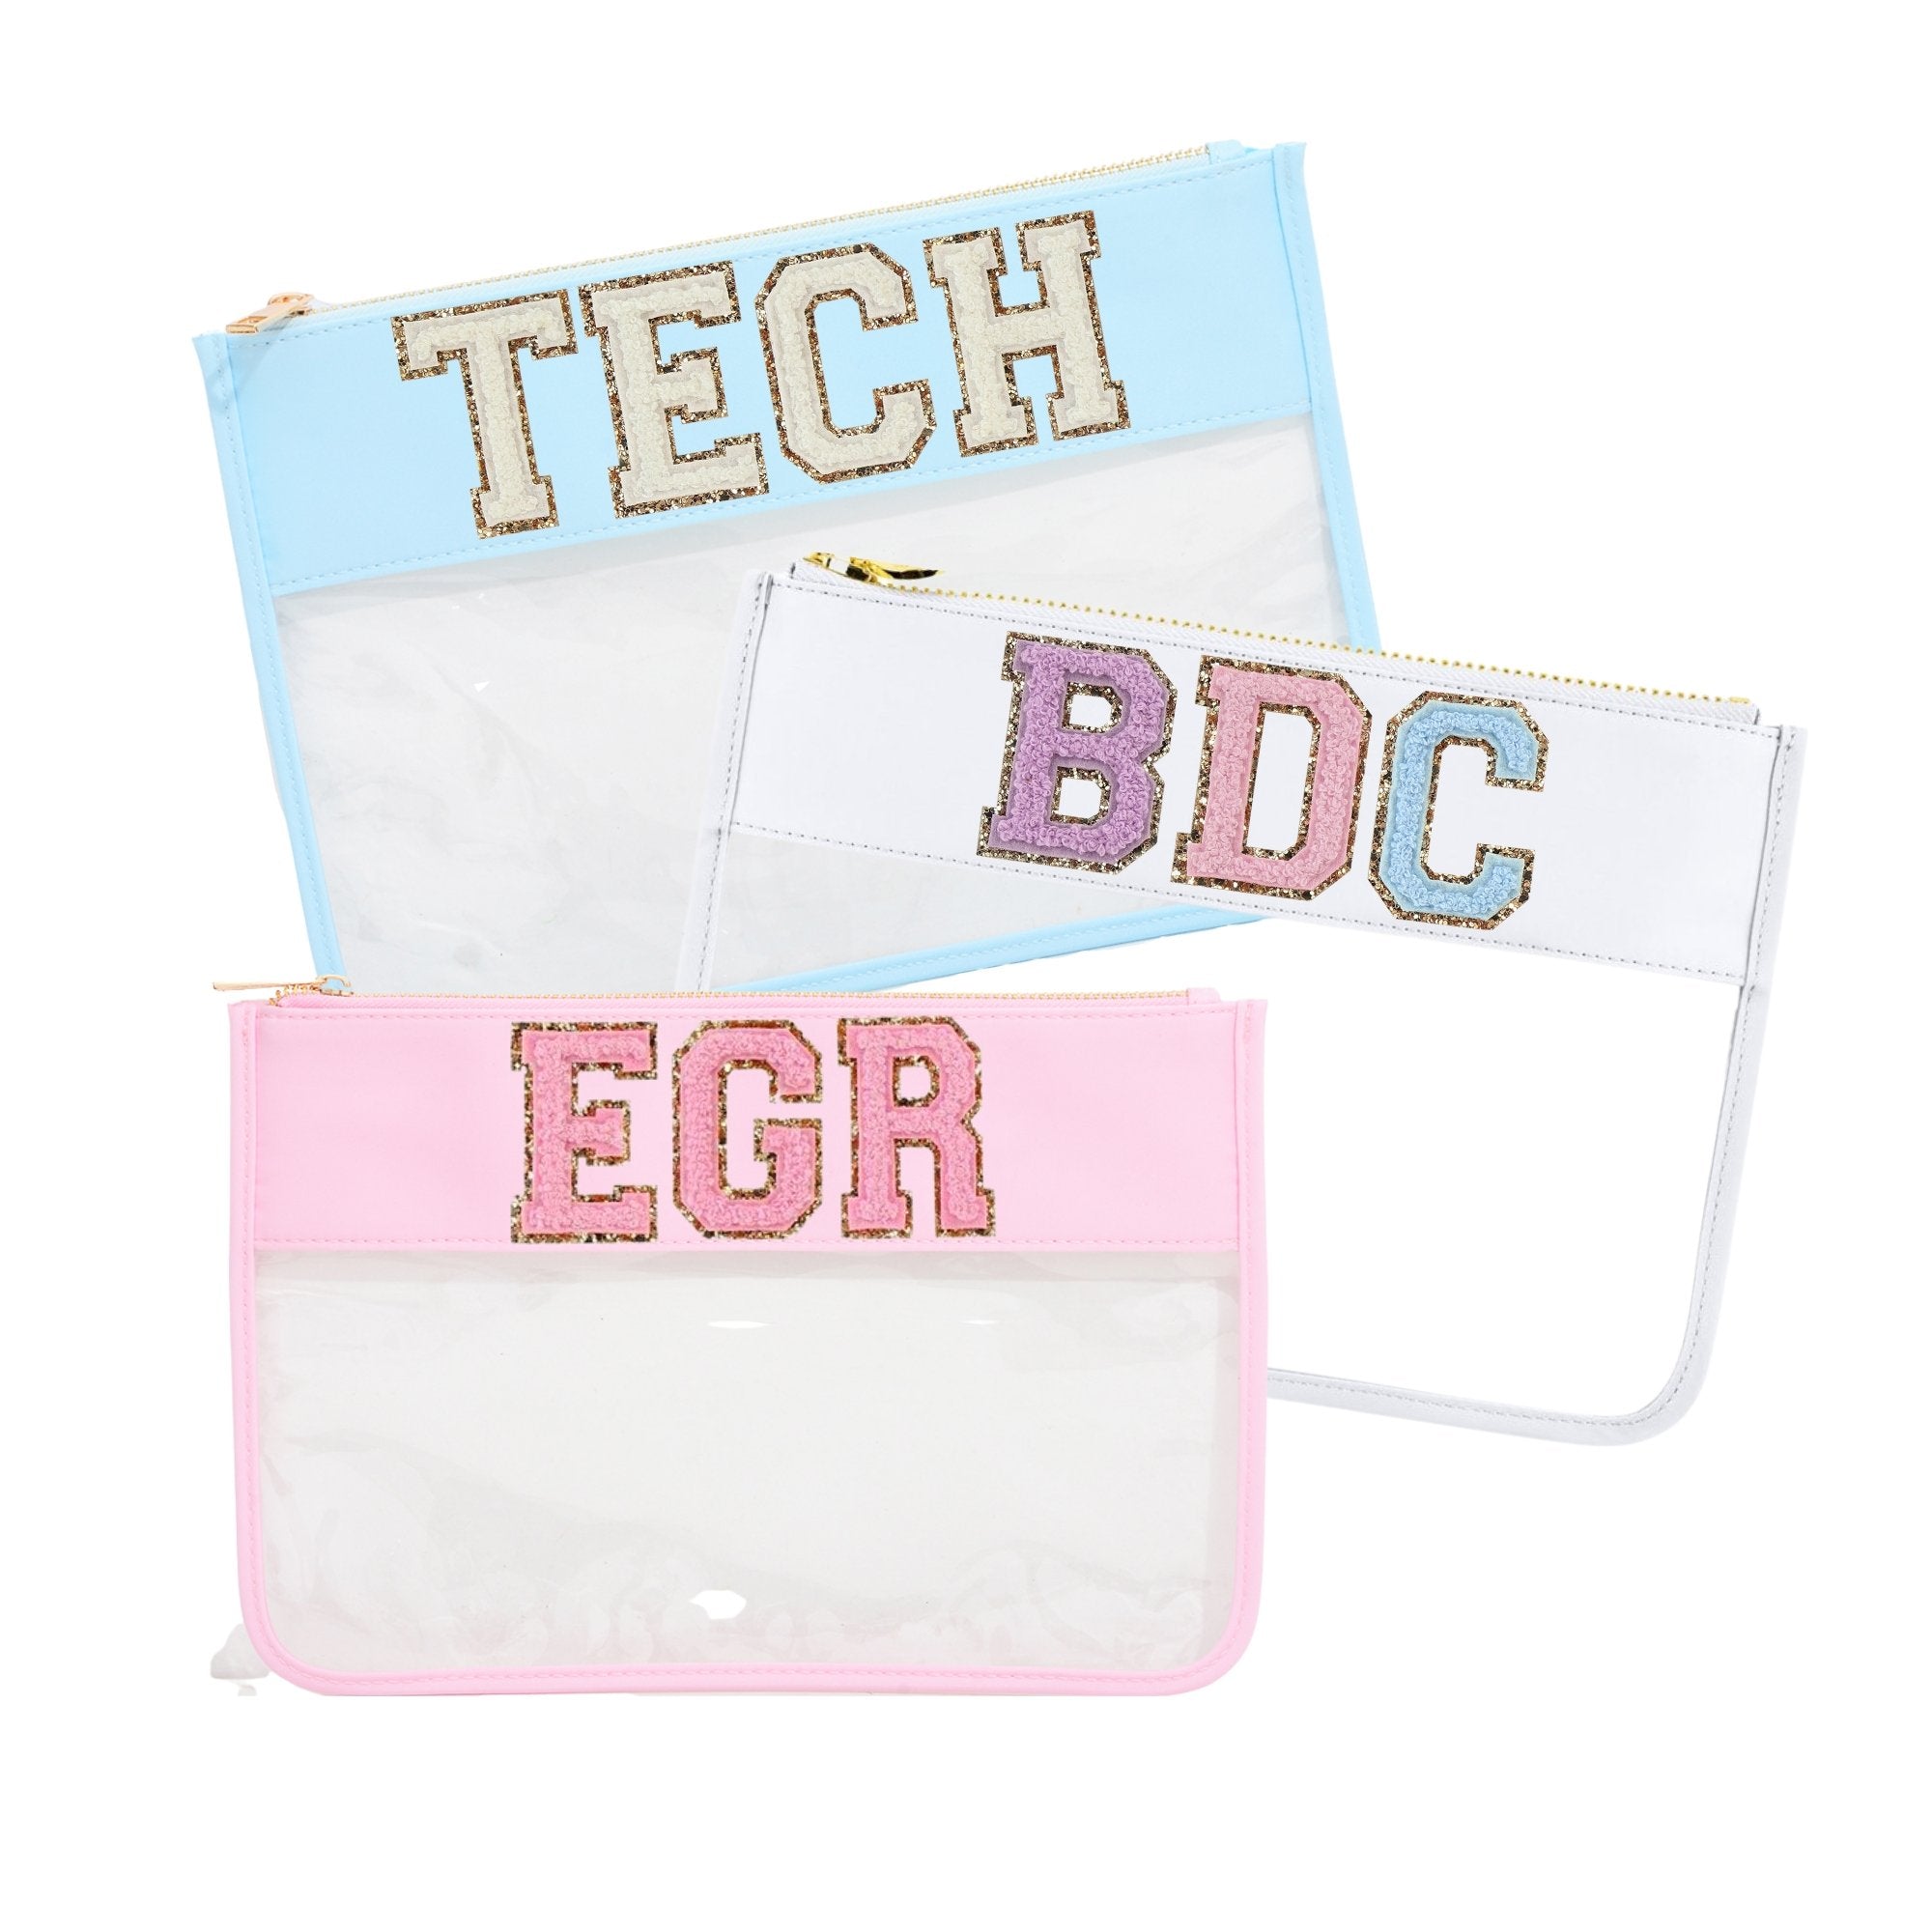 A group of clear nylon bags are customize with patches.